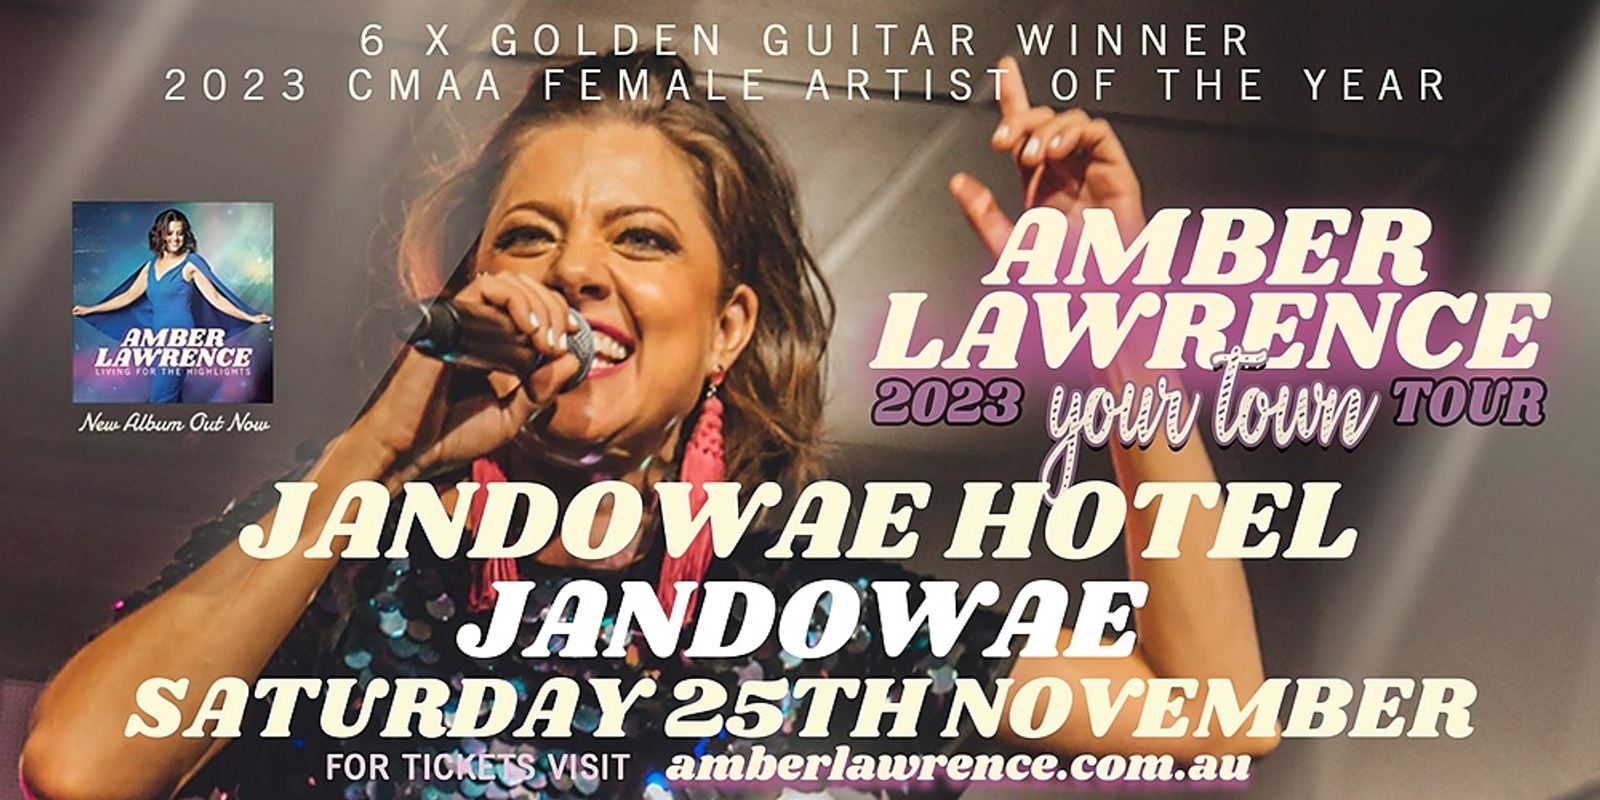 Amber Lawrence - Jandowae Hotel - Your Town Tour 2023